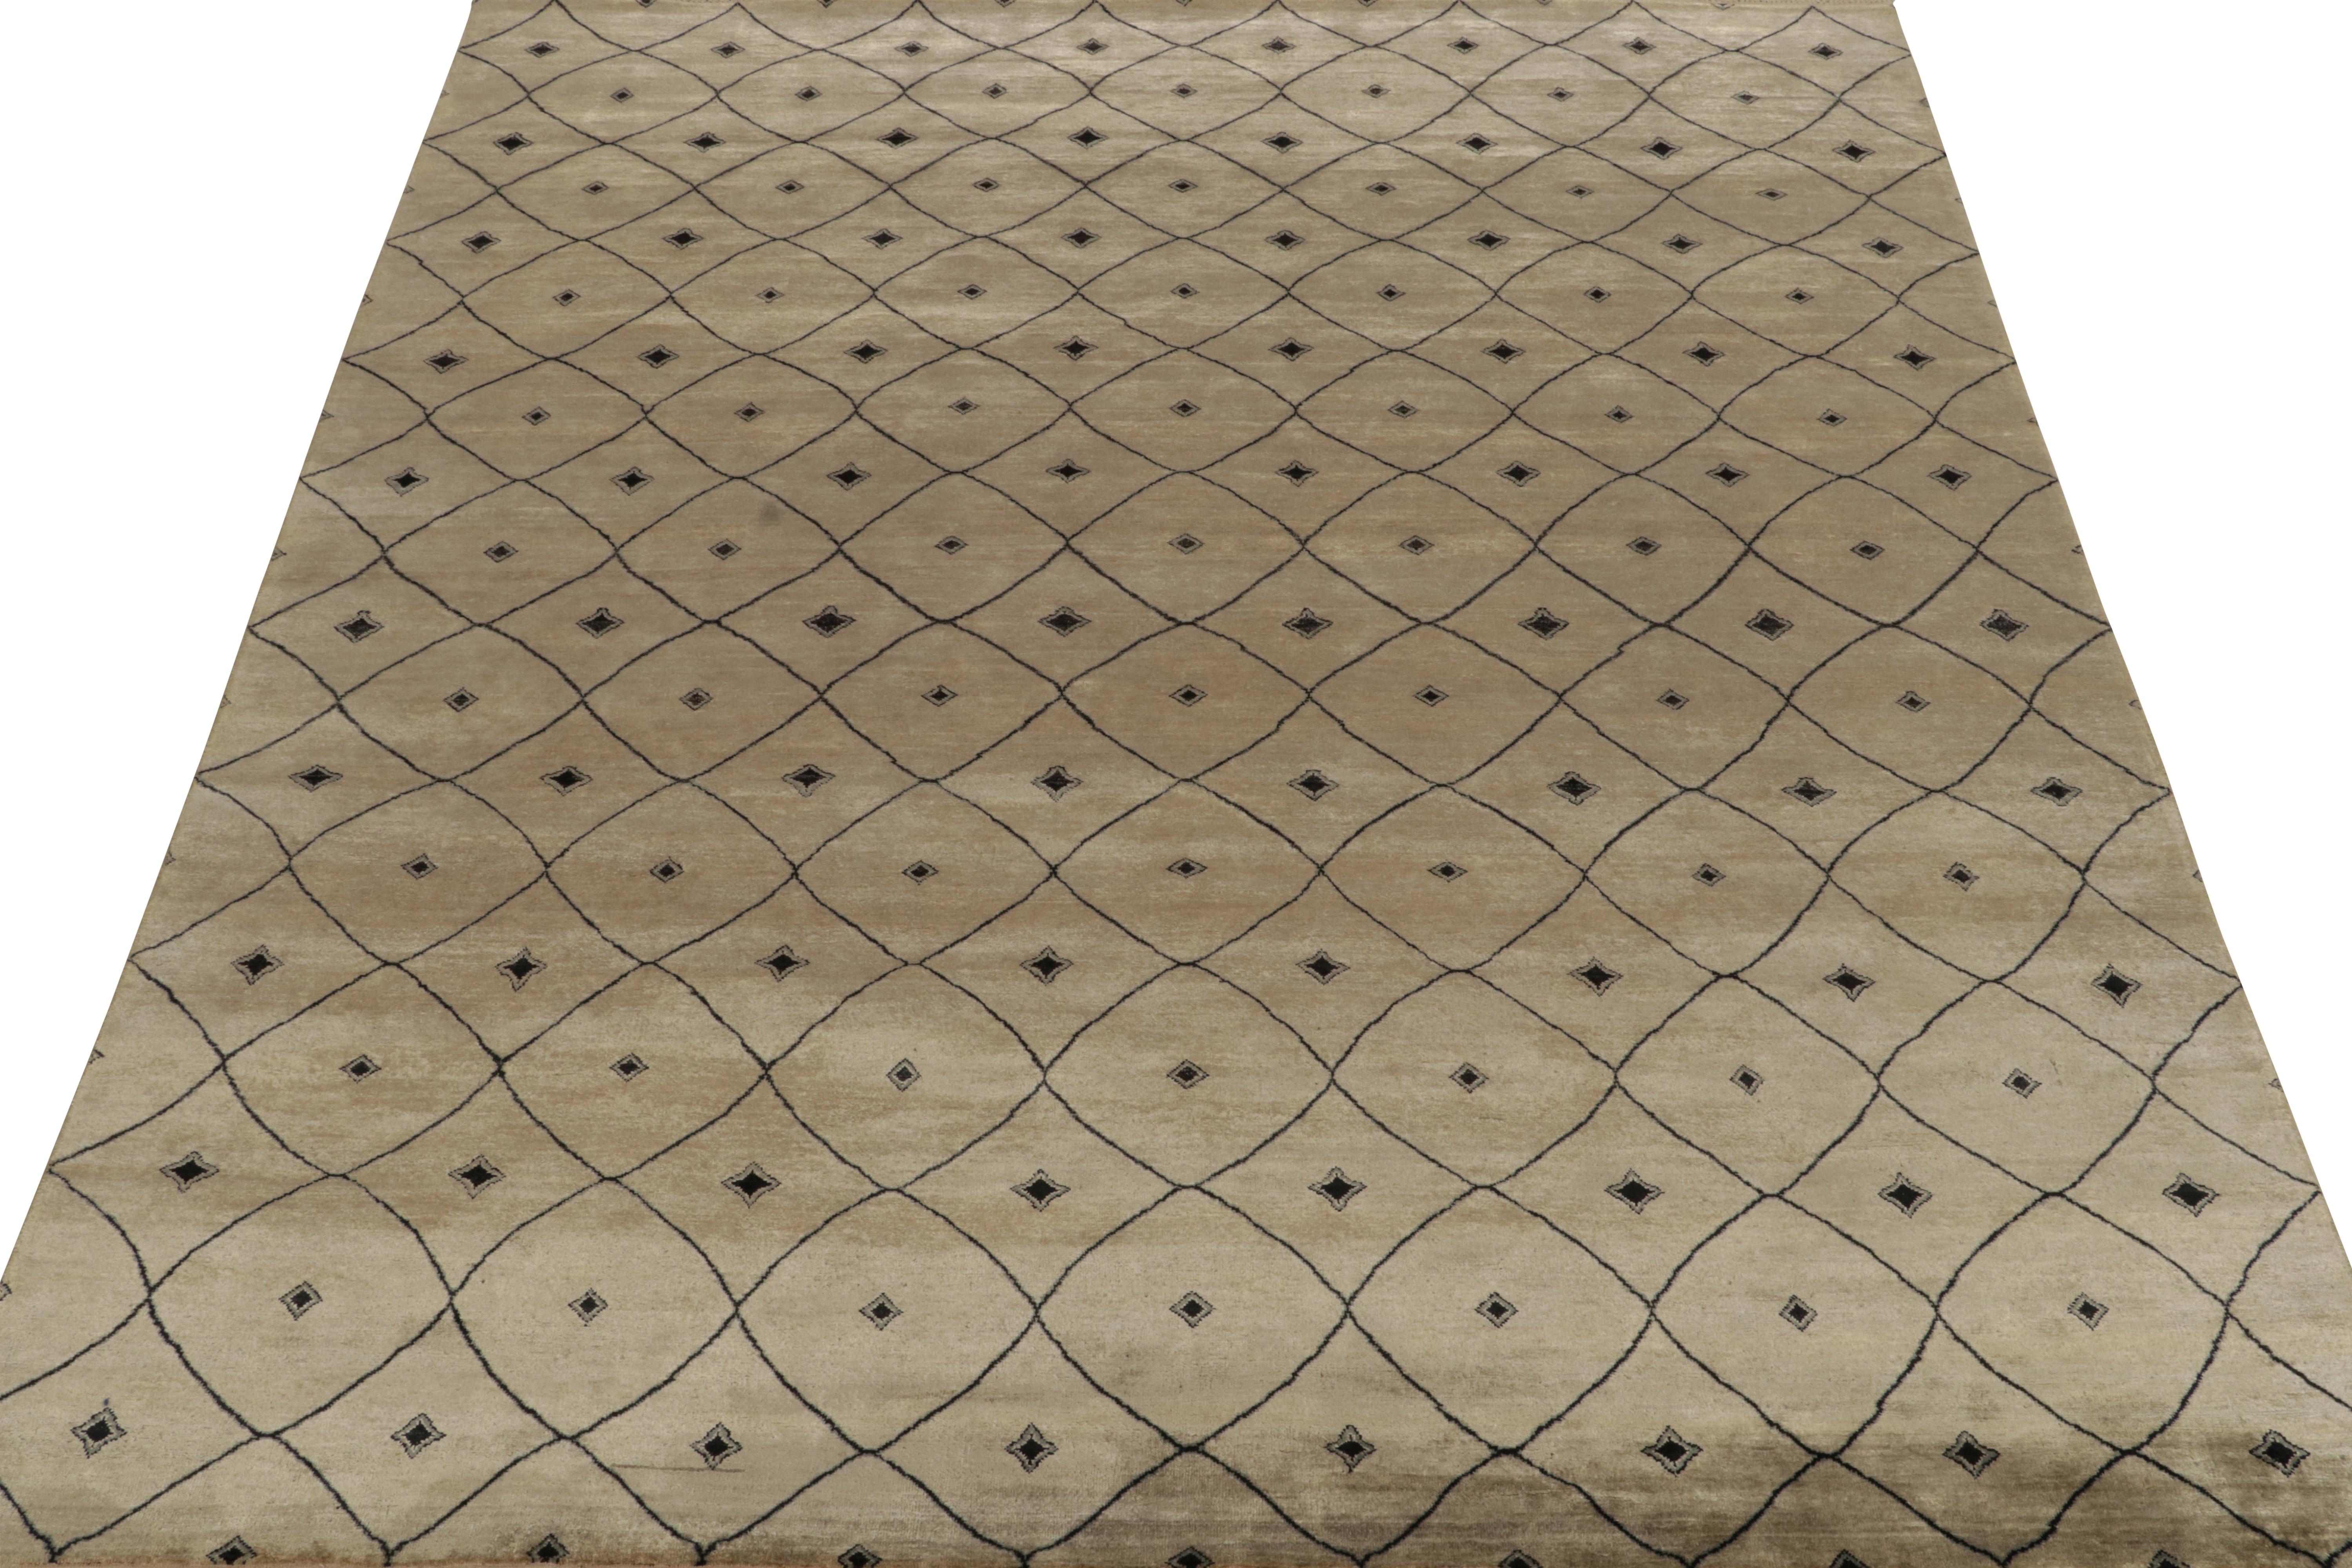 Indian Rug & Kilim’s Moroccan style rug in Beige-Brown with Black Trellis Pattern For Sale